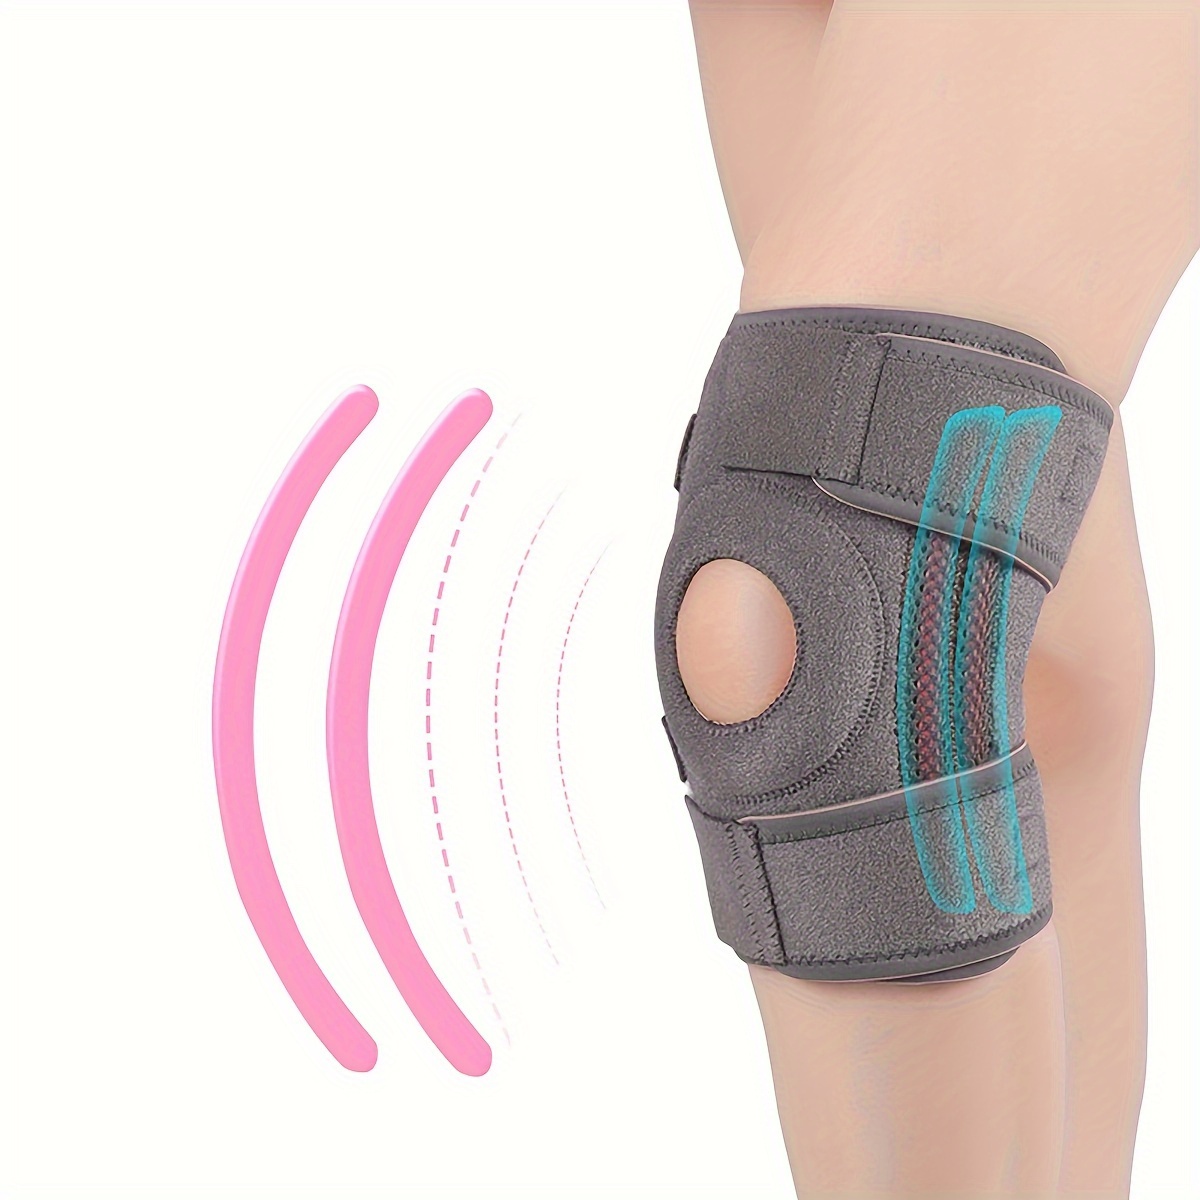 Big Clearance! Adjustable Knee Brace Support - Relieves ACL, LCL, MCL,  Meniscus Tear, Arthritis, Tendonitis Pain. Open Patella Dual Stabilizers  Non